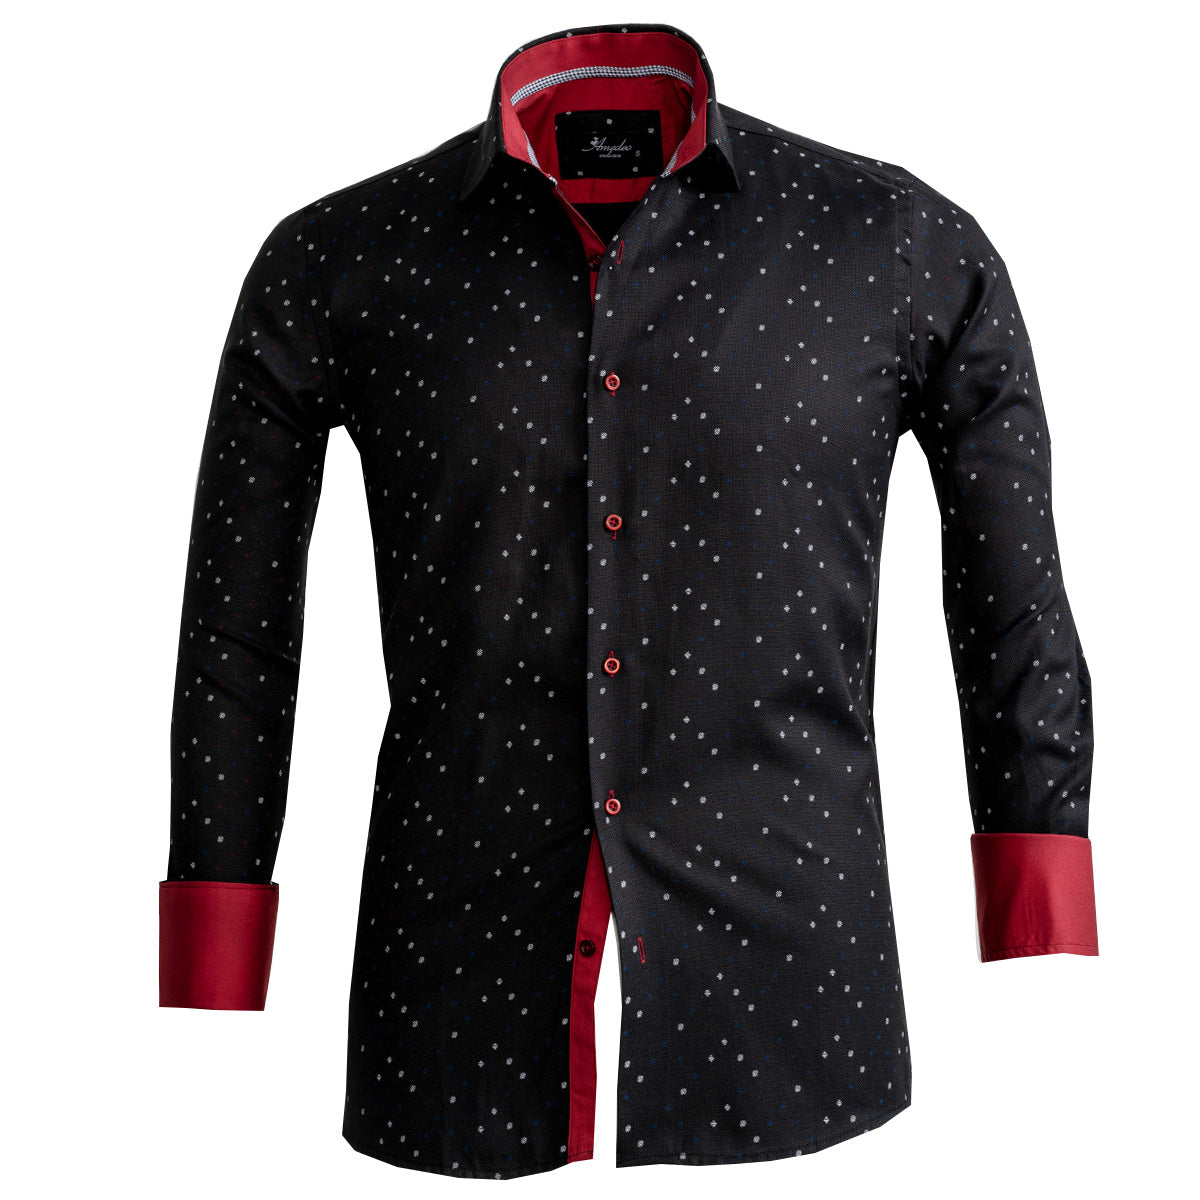 Black And Red Mens Slim Fit French Cuff Shirts with Cufflink Holes - Casual and Formal